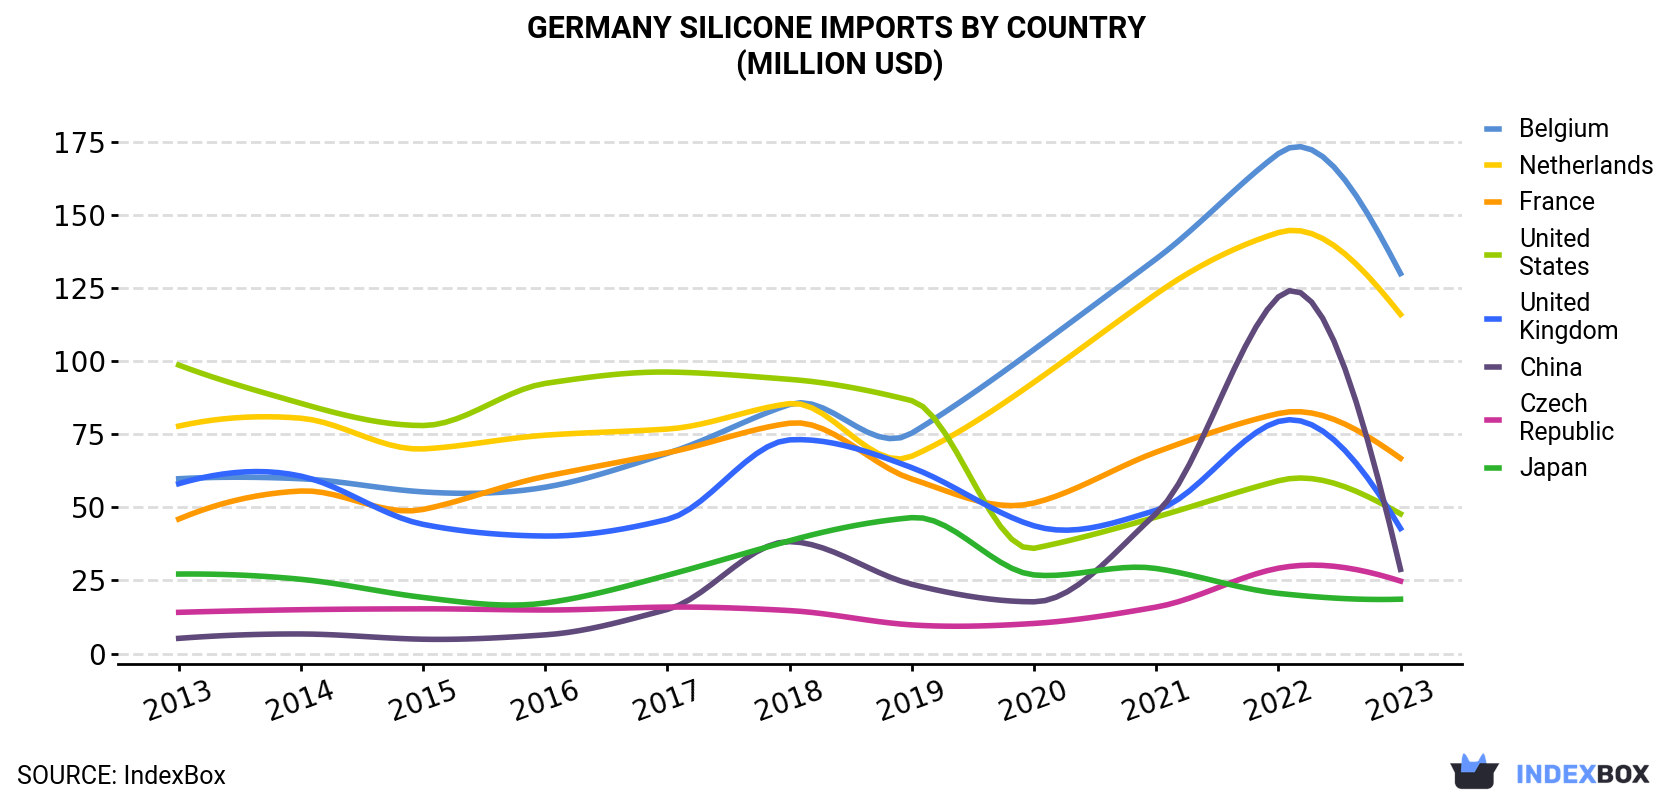 Germany Silicone Imports By Country (Million USD)